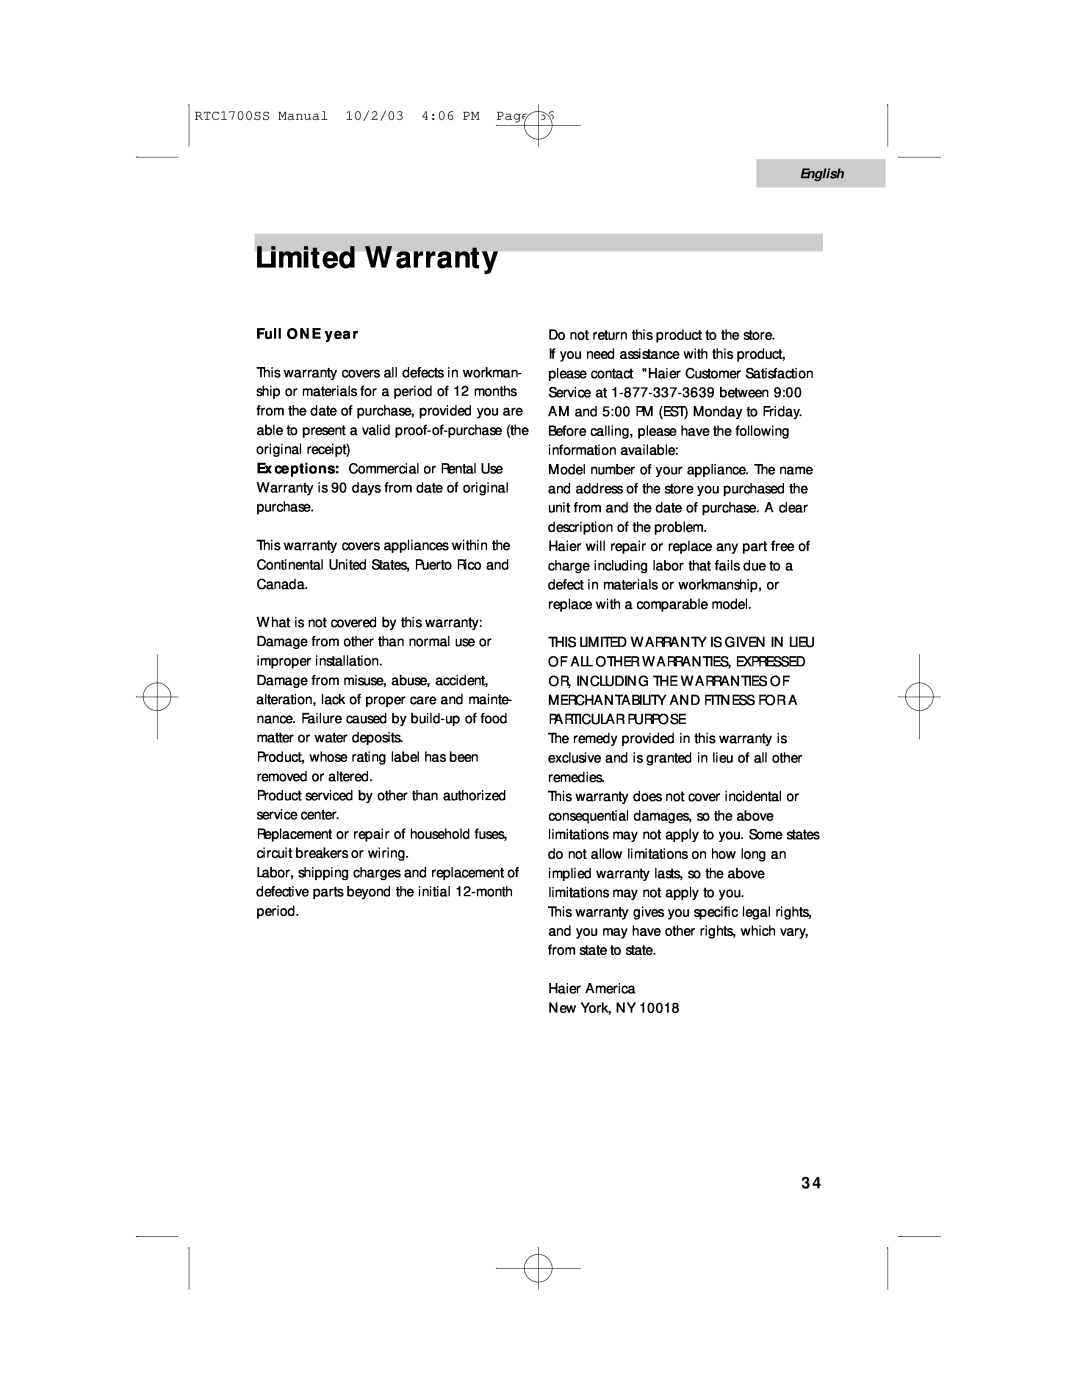 Haier RTC1700SS user manual Limited Warranty, English, Full ONE year 